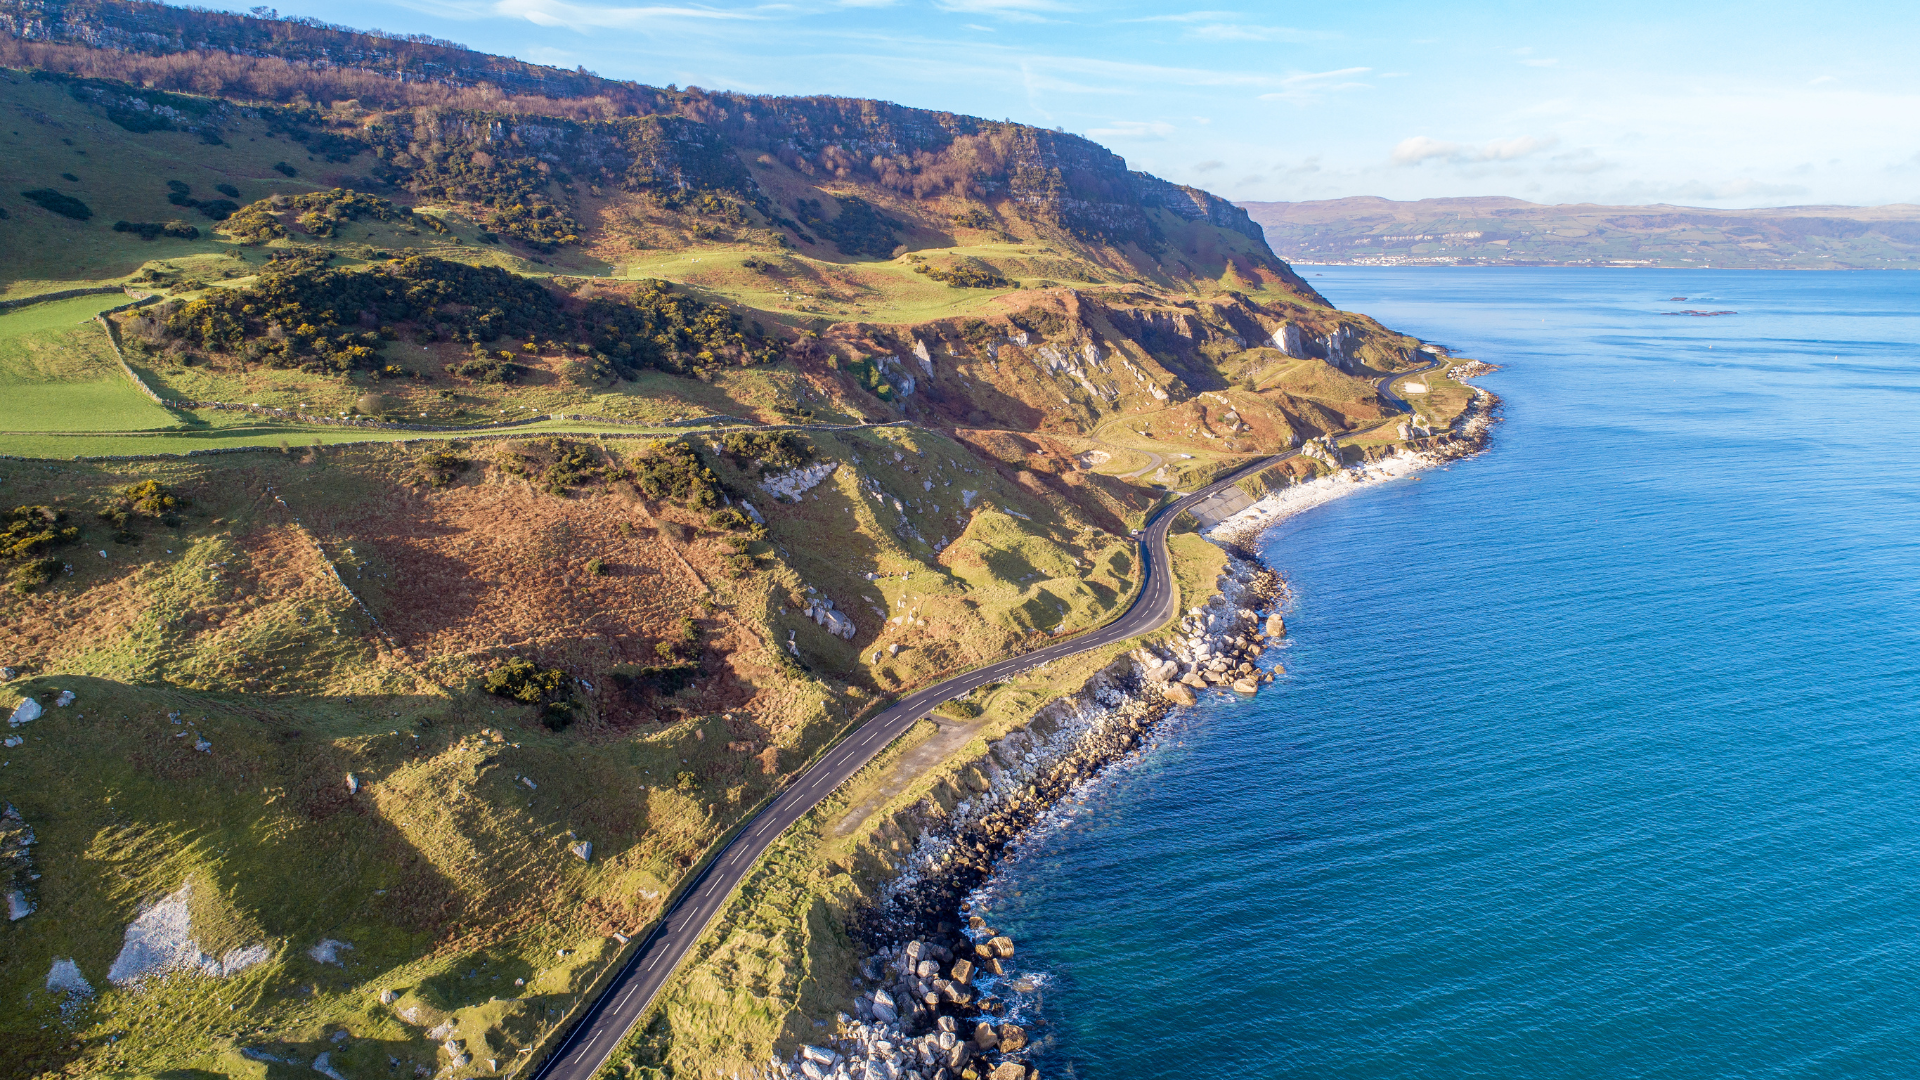 Discover the Causeway Coastal Route